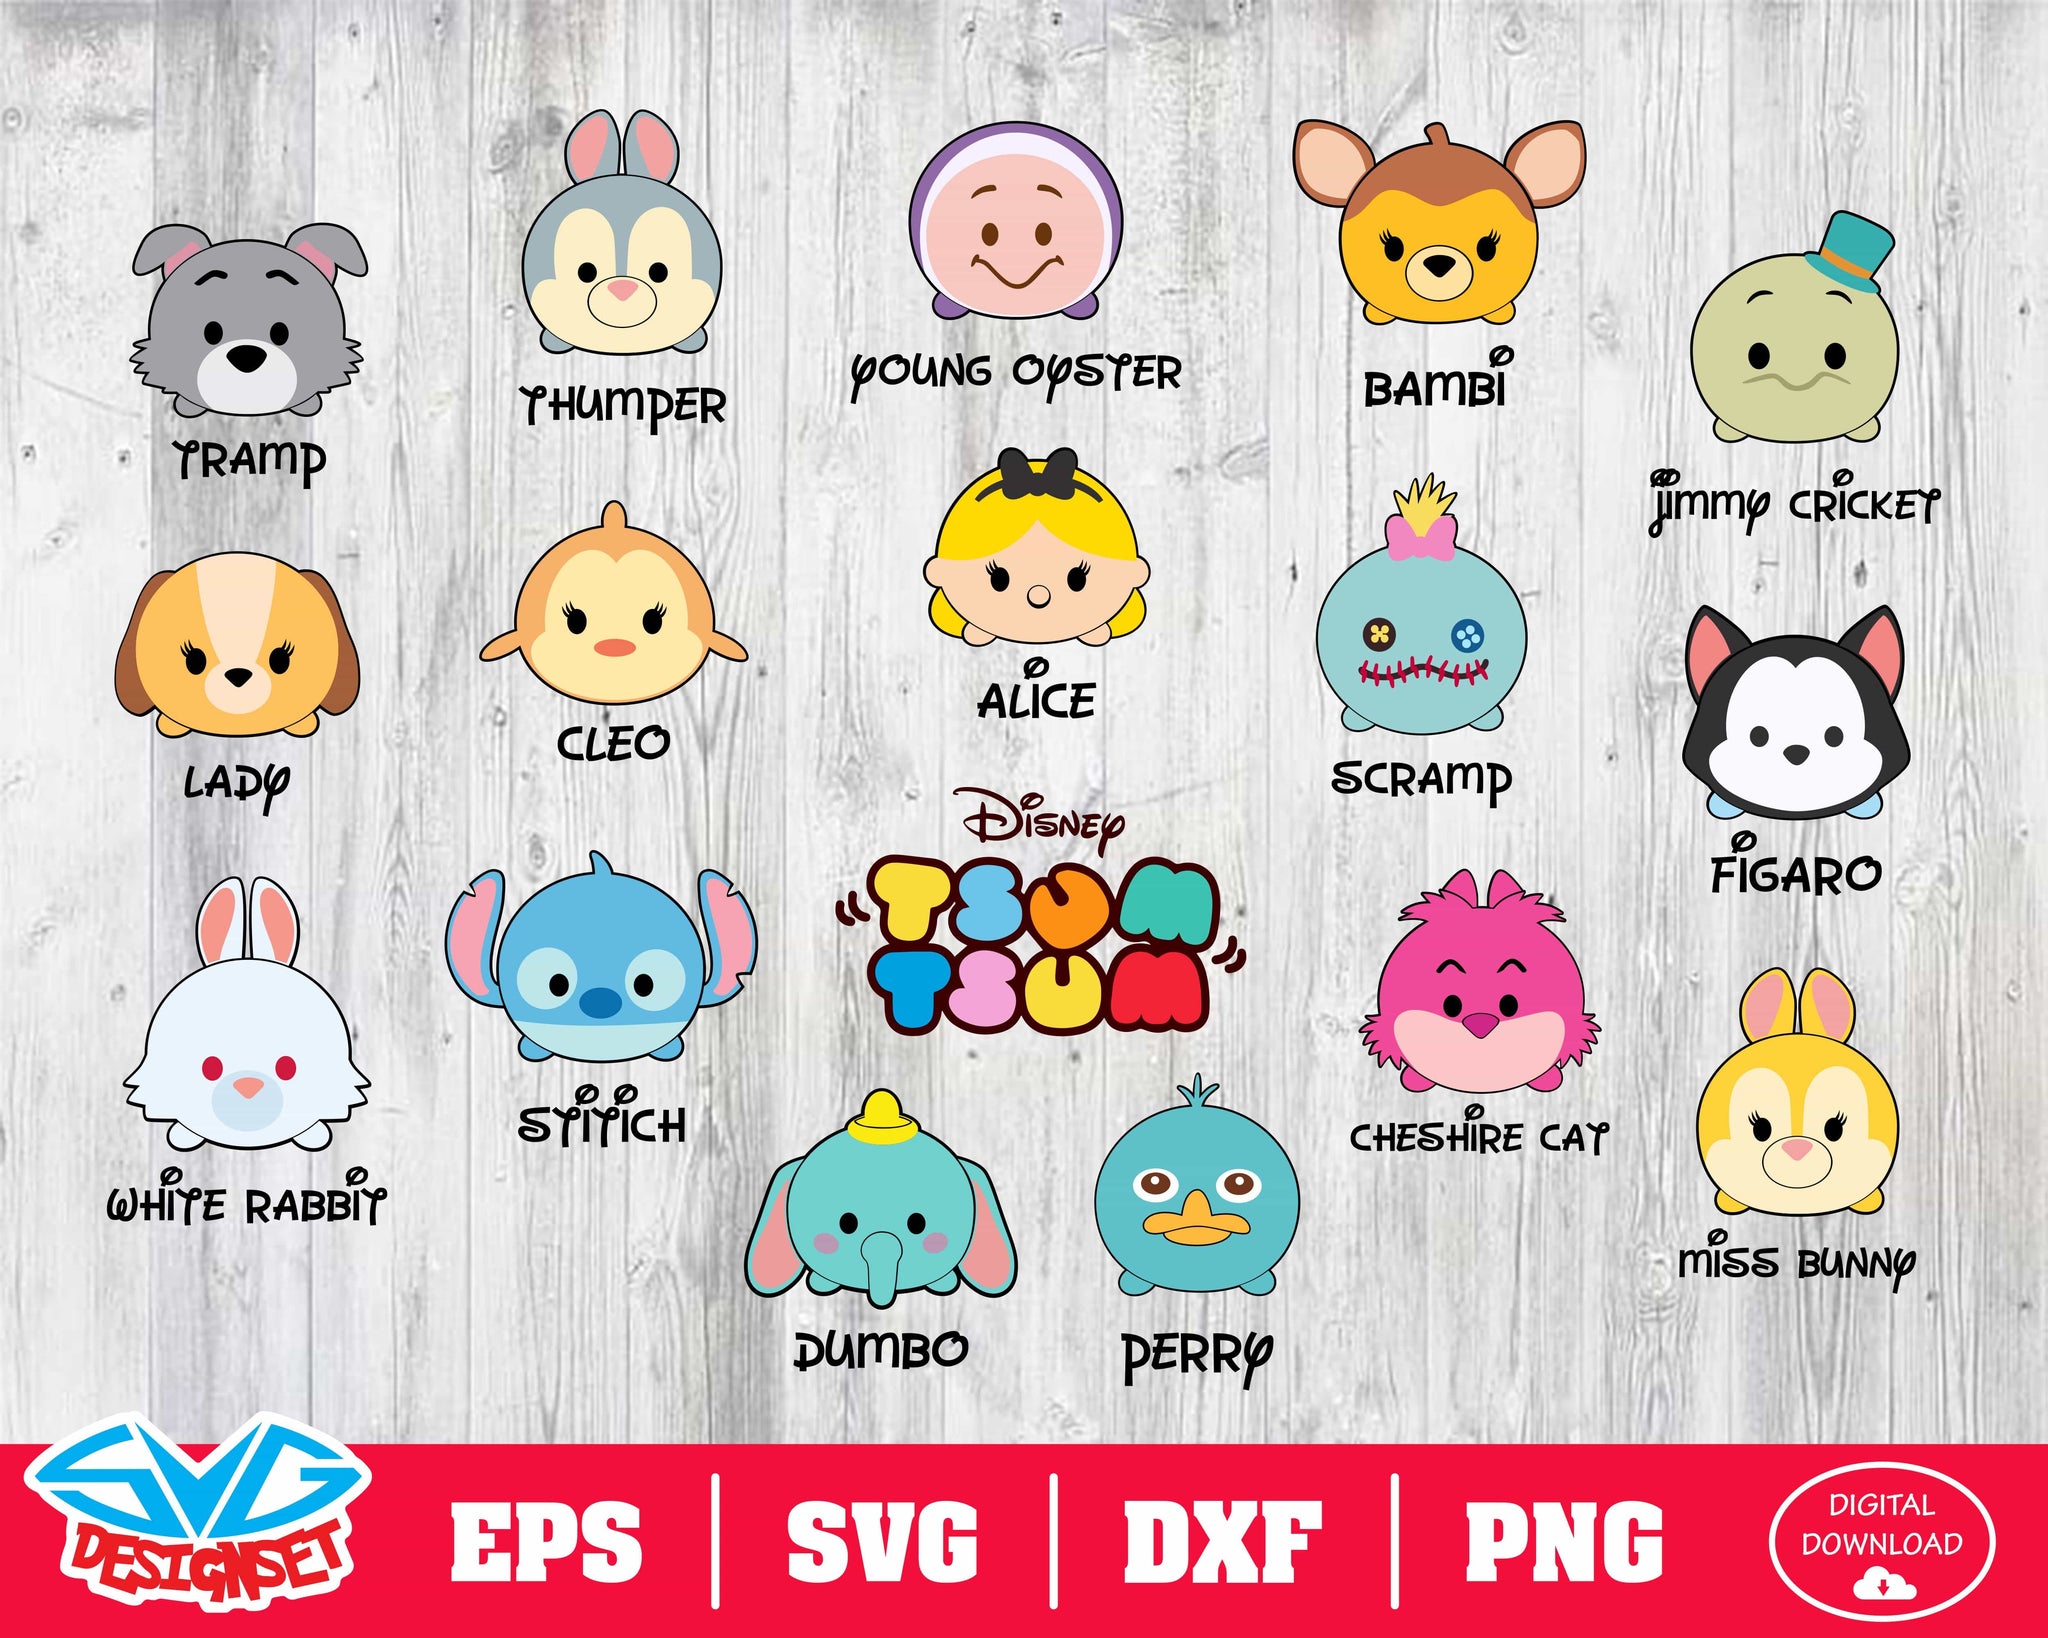 Tsum tsum Svg, Dxf, Eps, Png, Clipart, Silhouette and Cutfiles #2 - SVGDesignSets